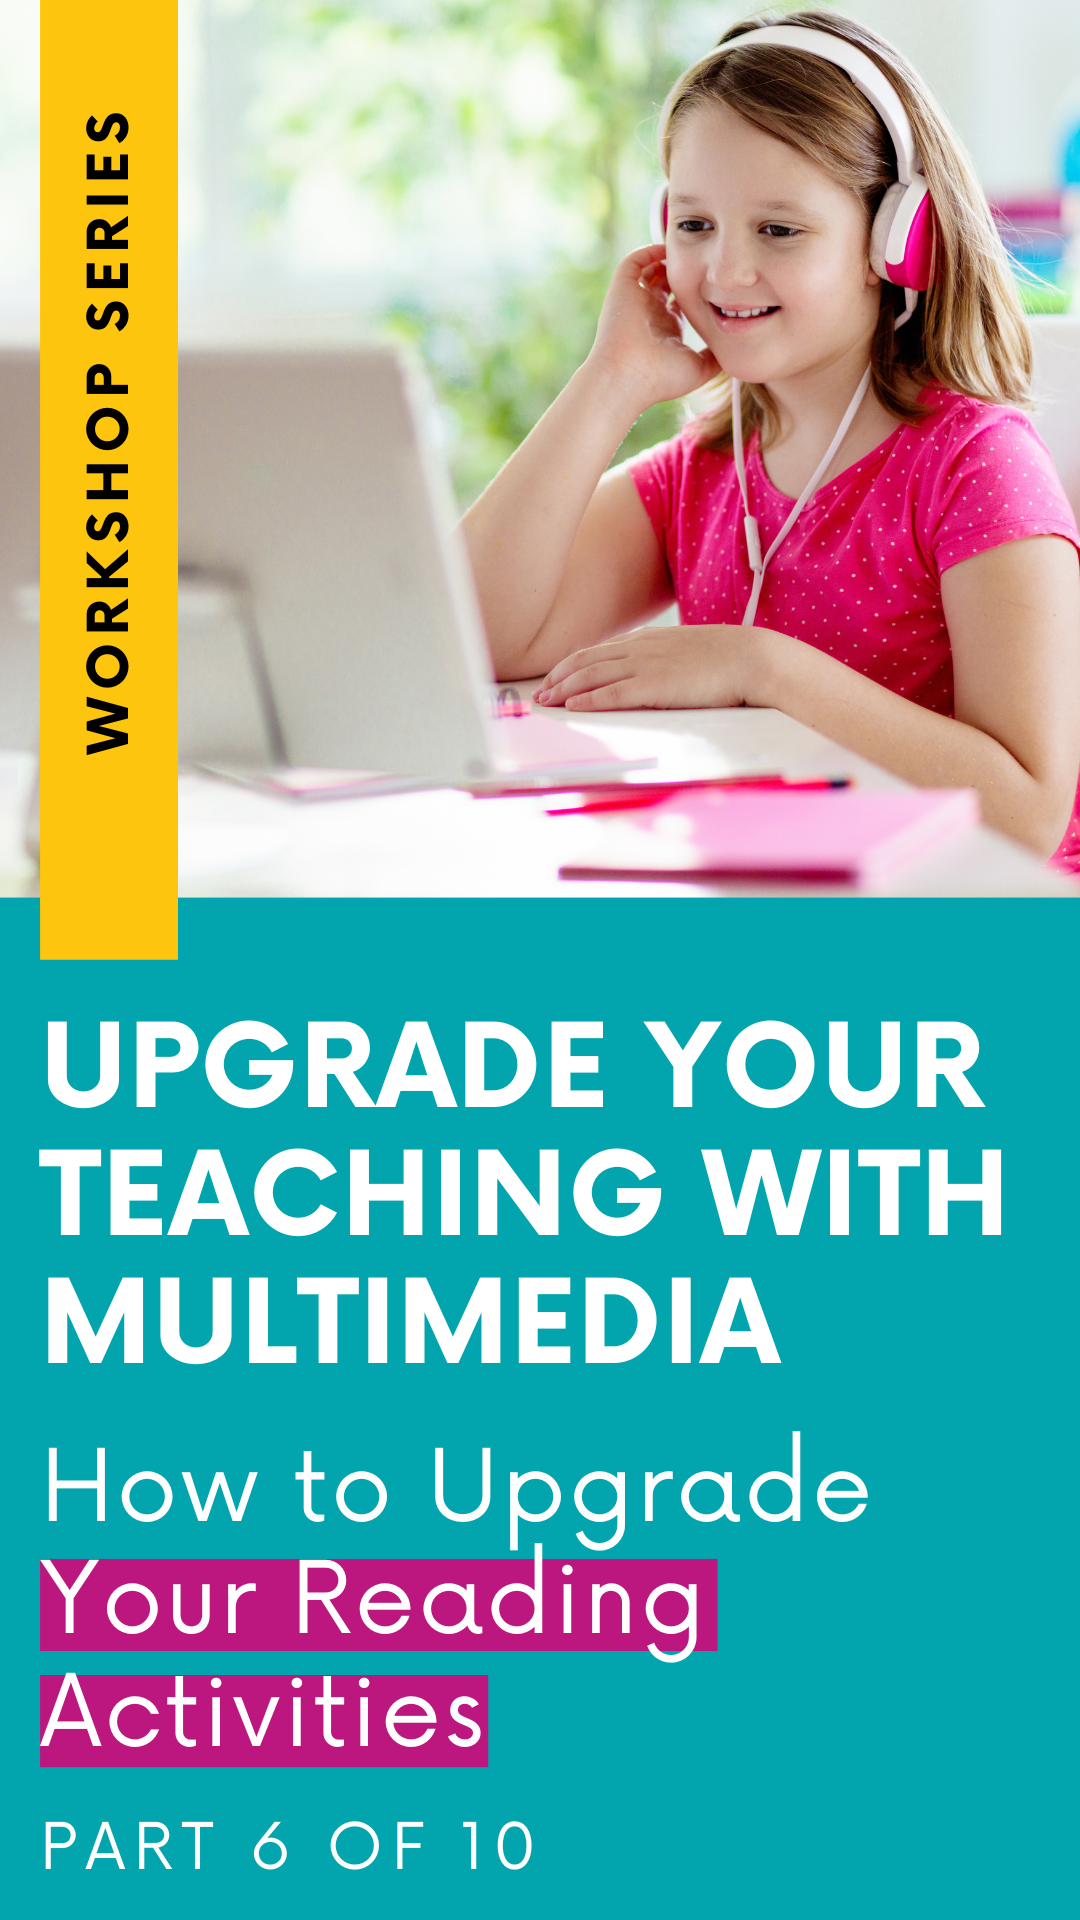 Upgrade Your Reading Activities! (From the Upgrade Your Teaching with Multimedia Workshop Series: Part 6) (Copy)